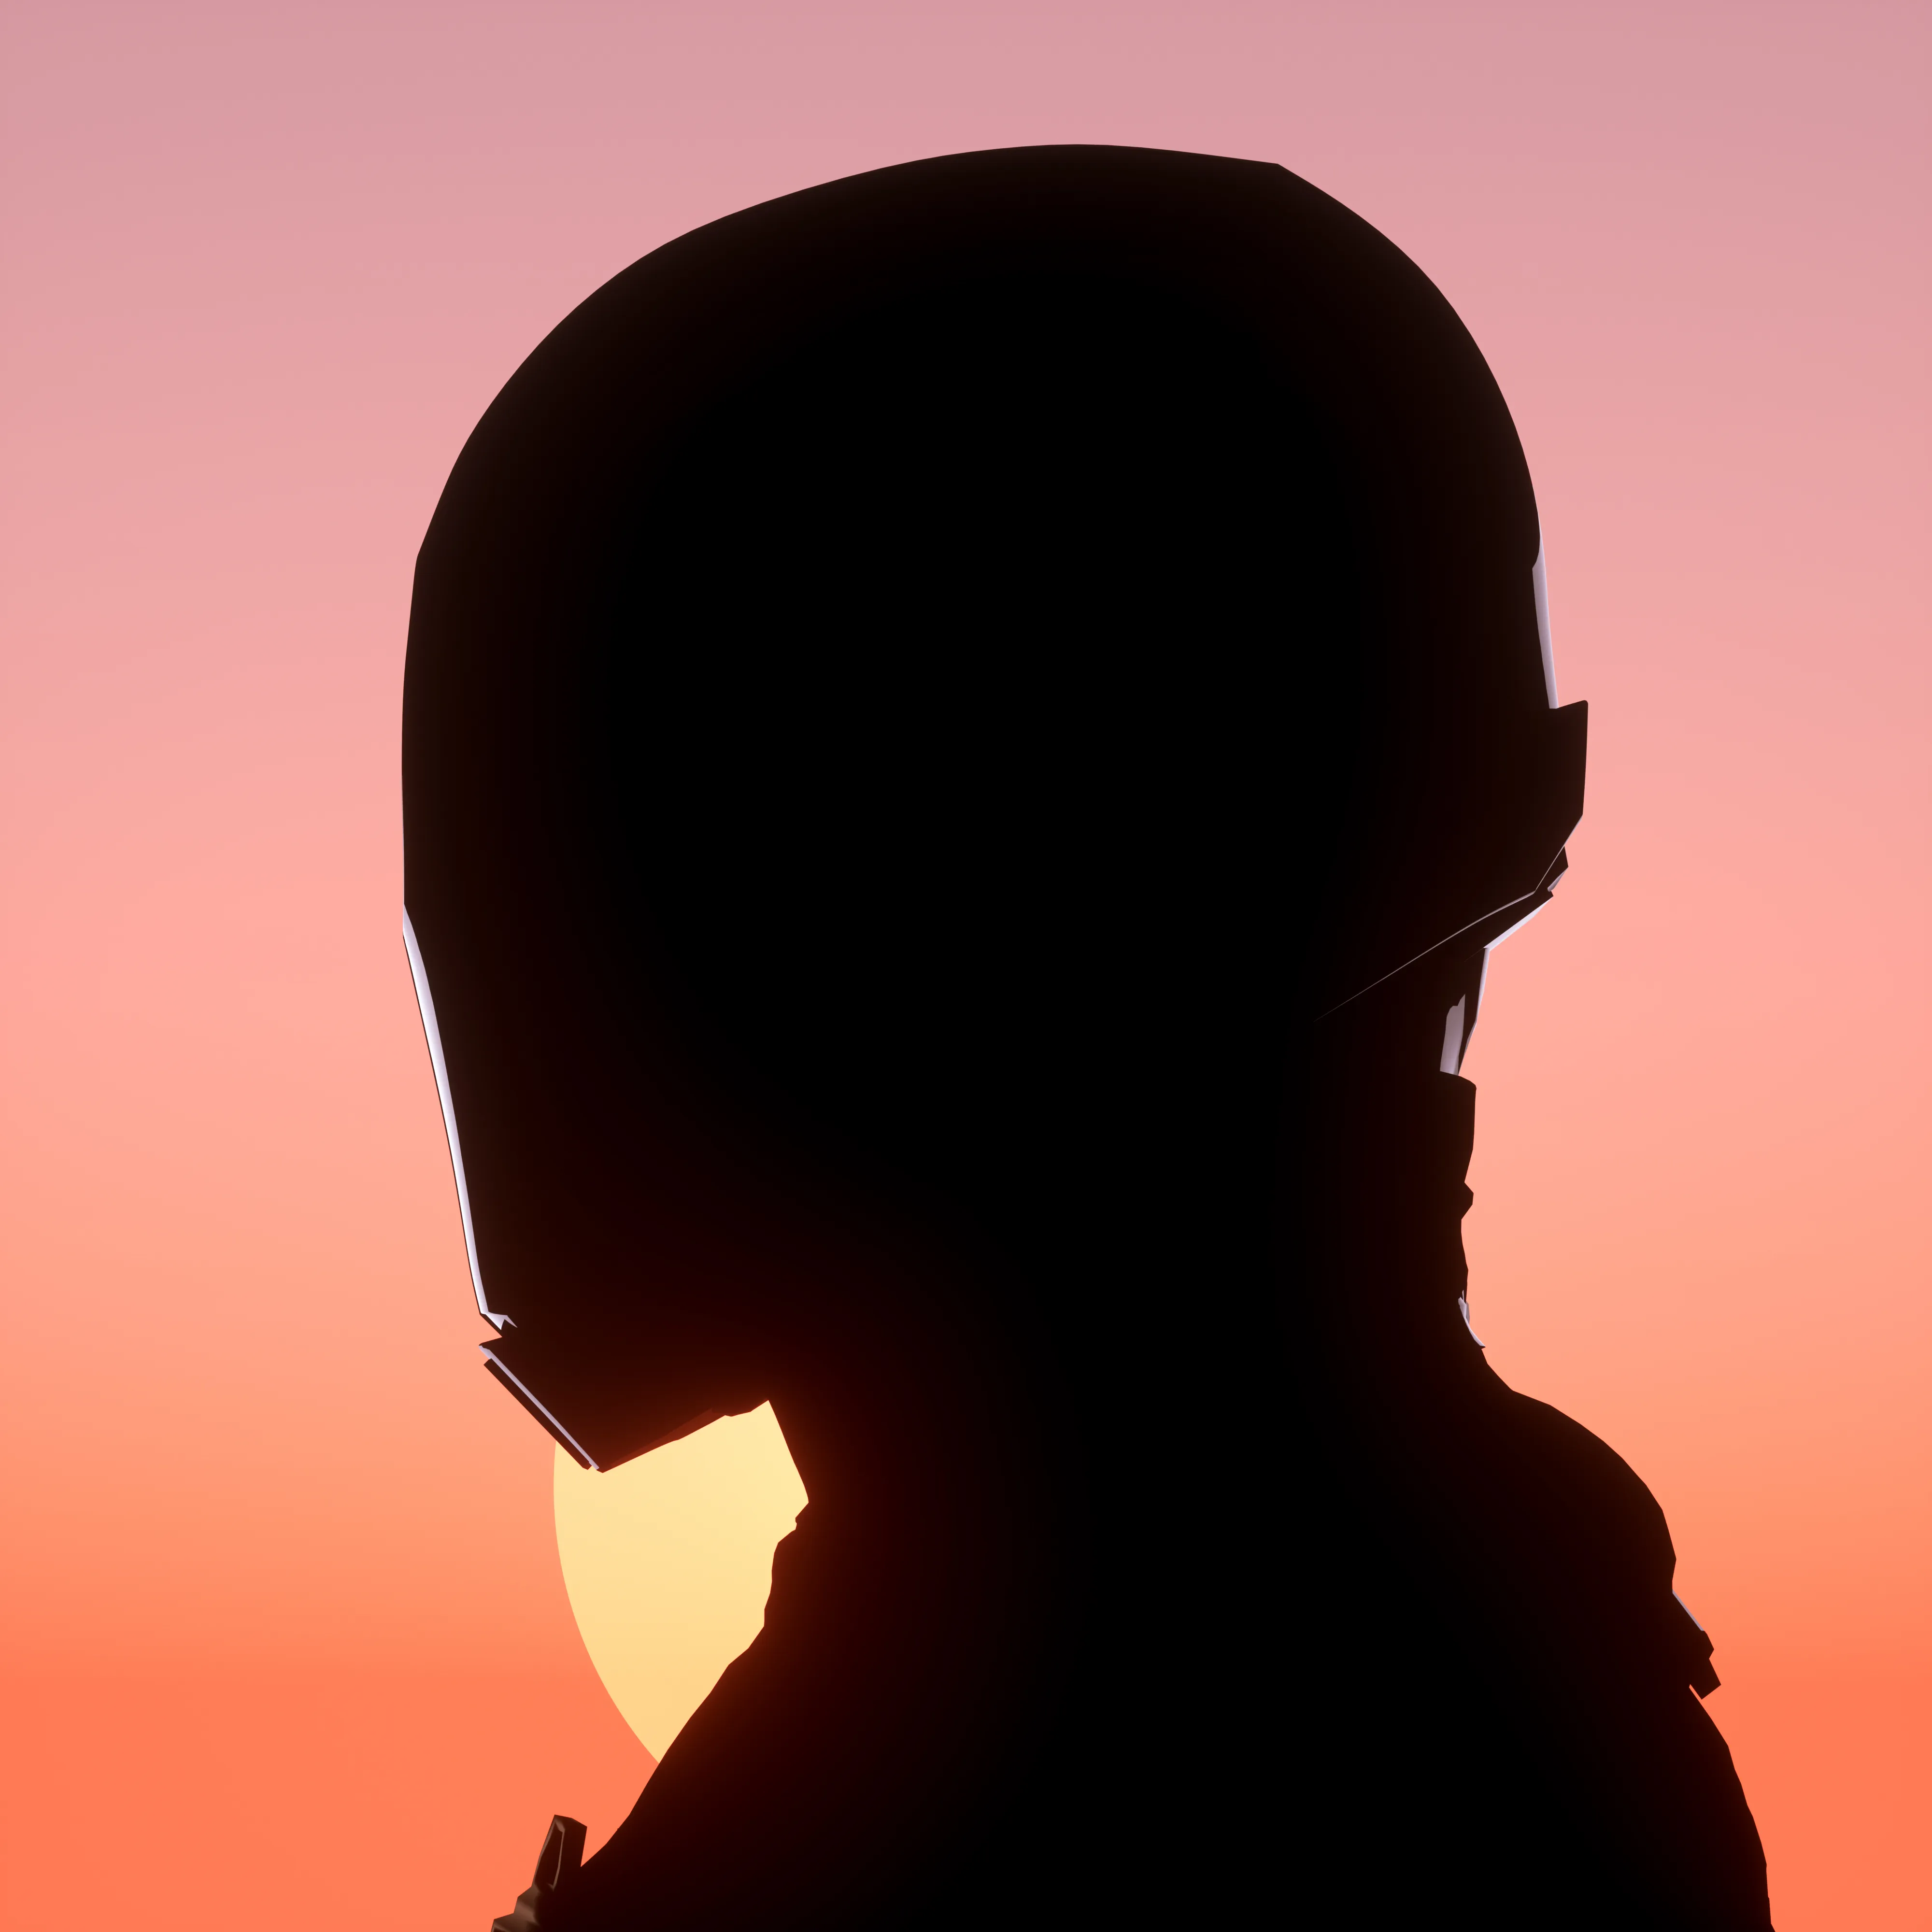 Illustration of a futuristic astronaut in front of a pink and orange gradient sky